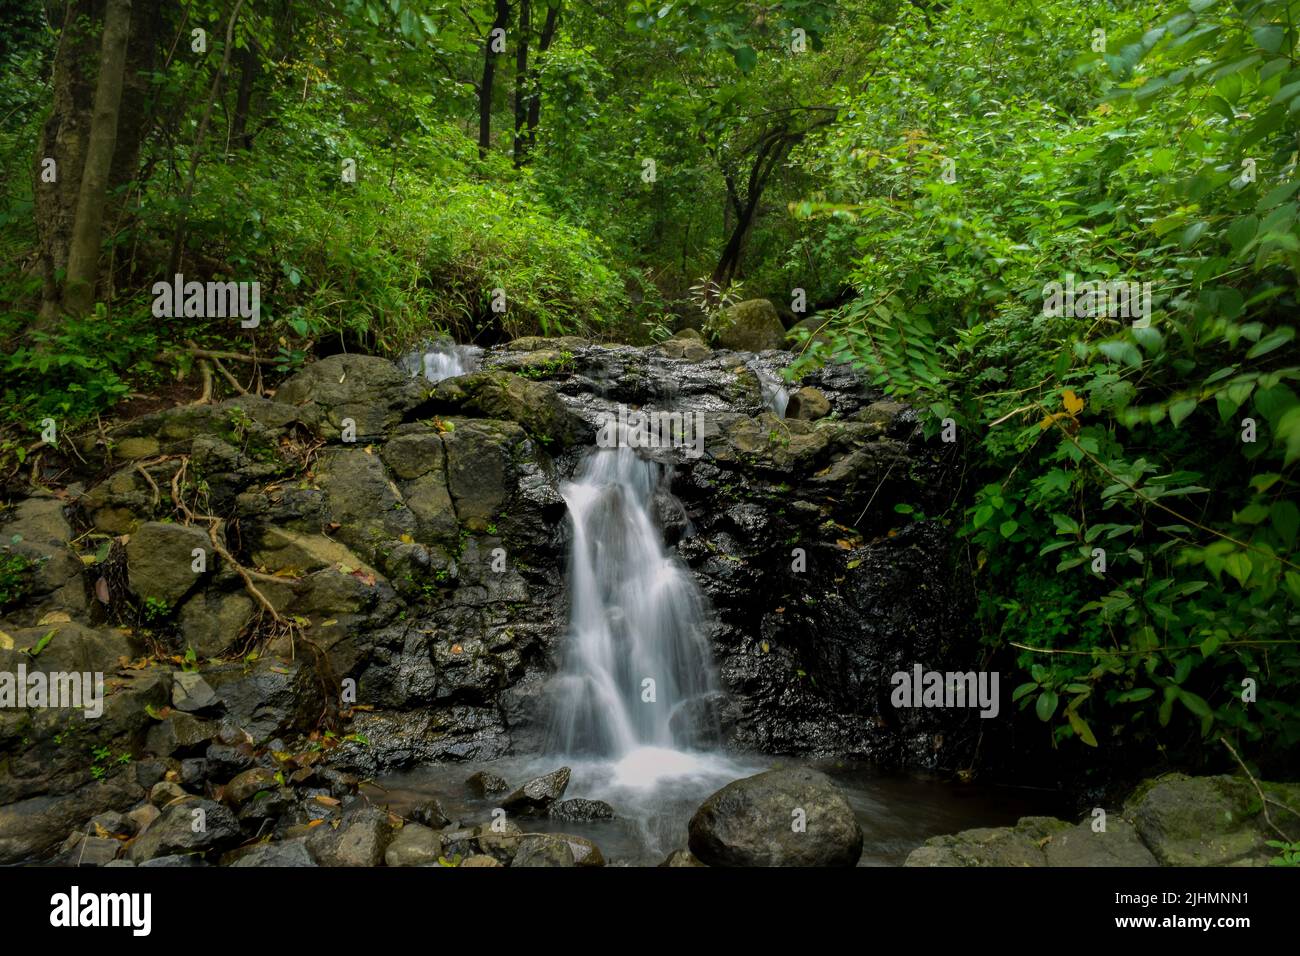 Small water stream coming from the hill and flowing on the rocks during monsoon rainy season with greenery all around. Stock Photo